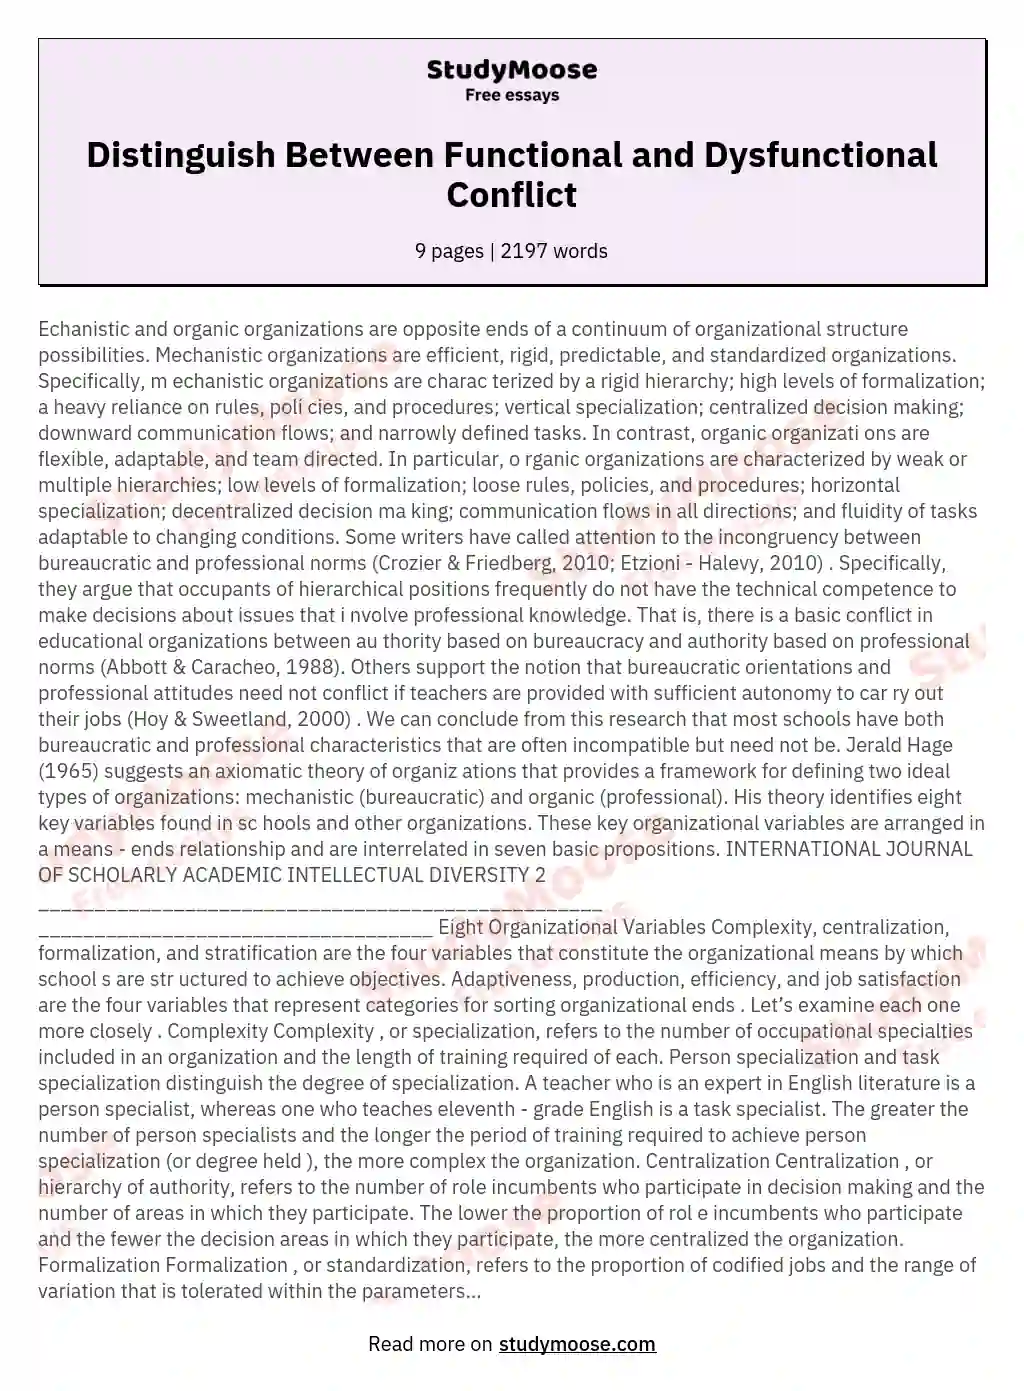 Distinguish Between Functional and Dysfunctional Conflict essay